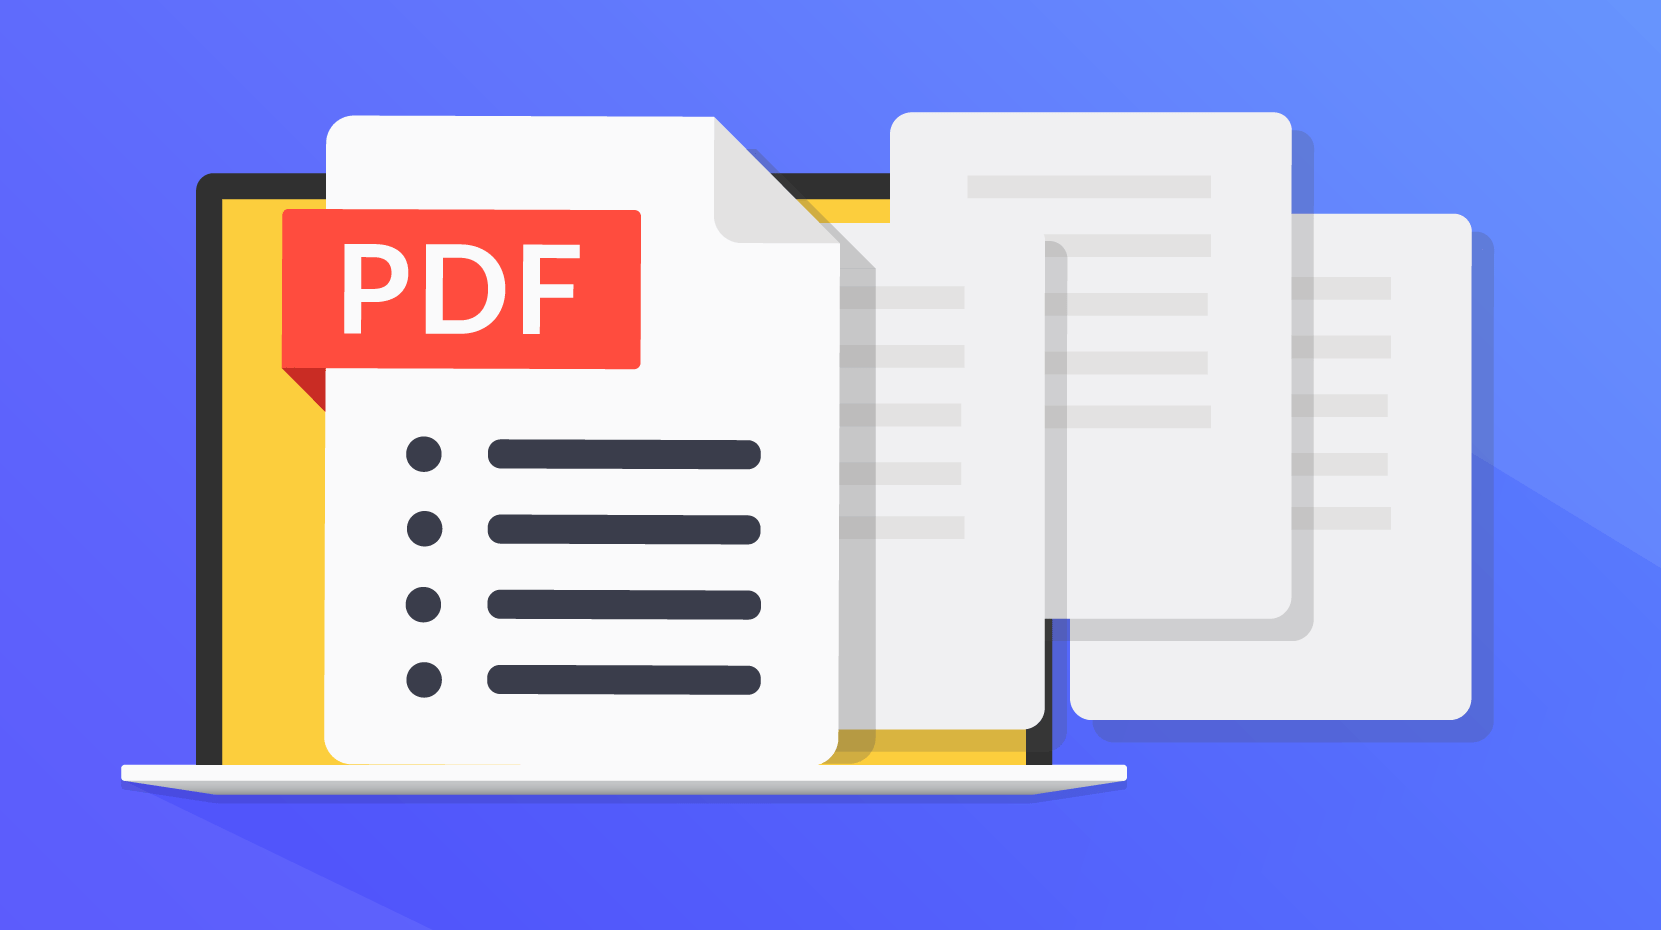 Working with PDF: 8 Amazing Features of PDFBear